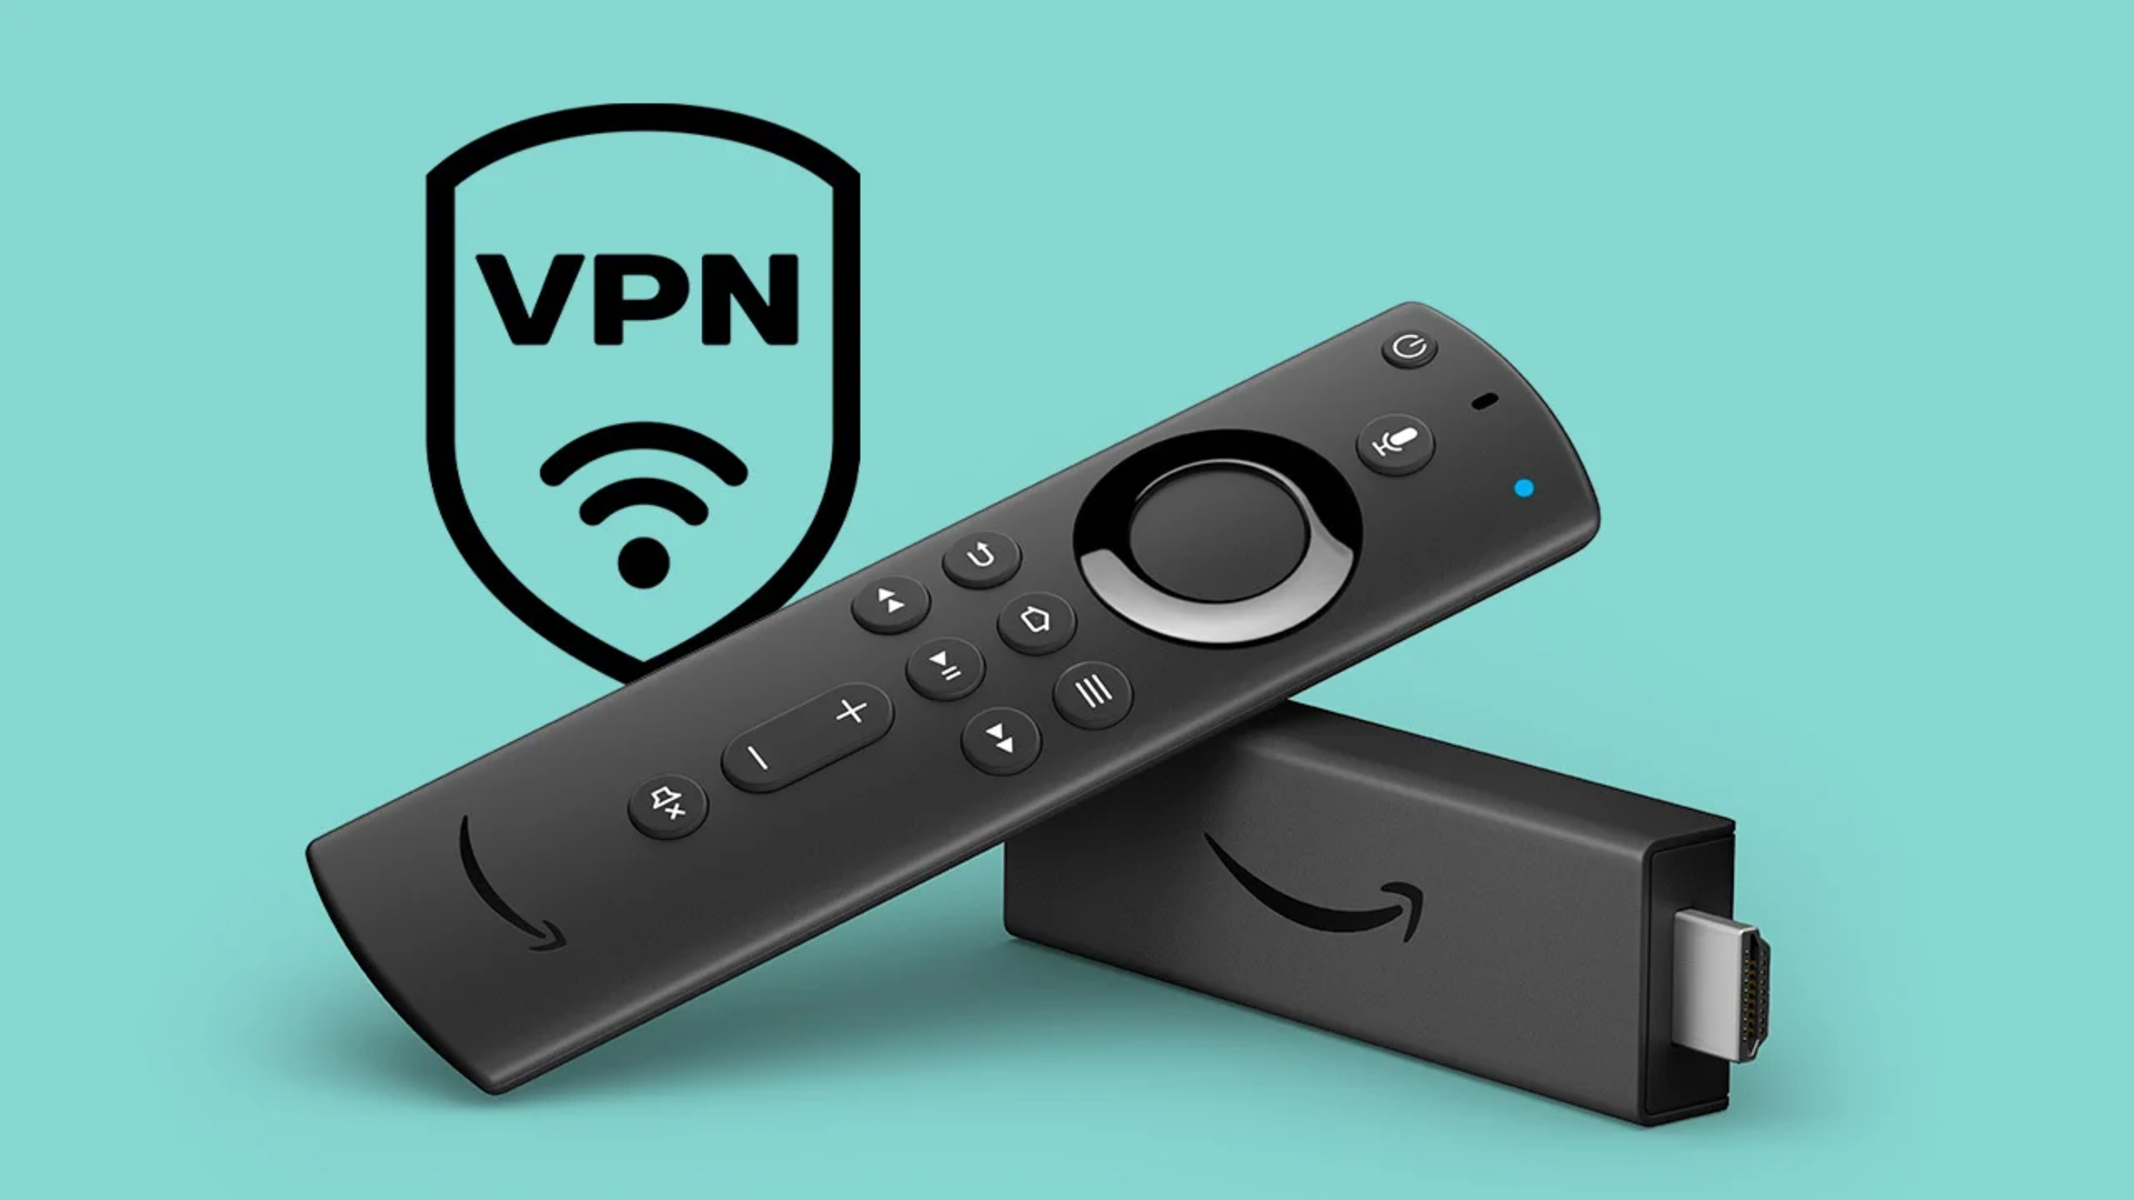 How To Install VPN On Firestick